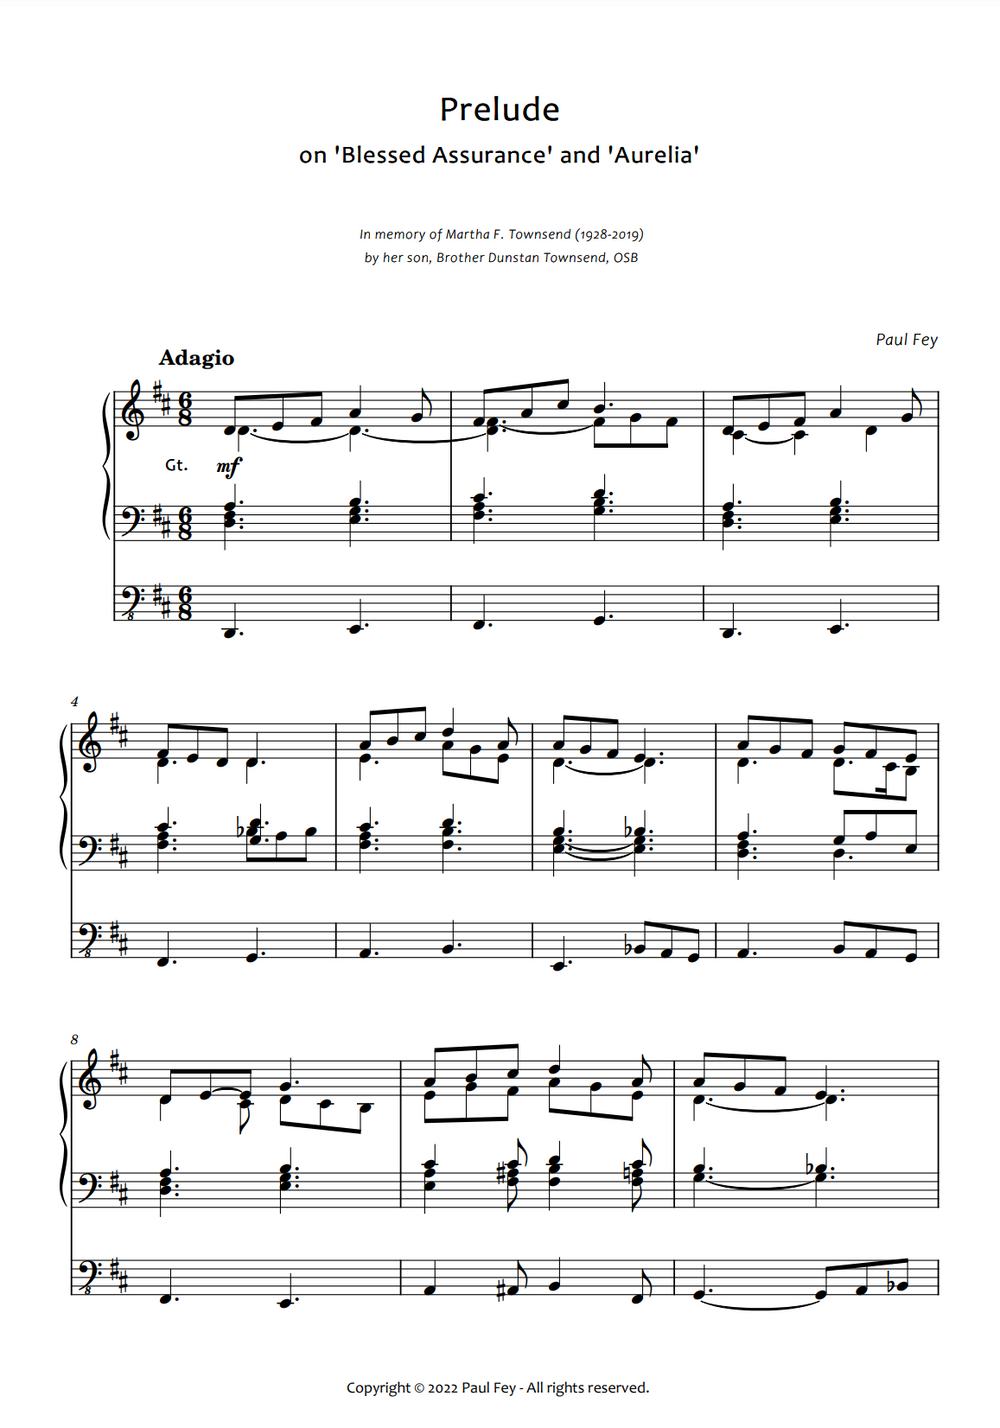 Prelude on "Aurelia" and "Blessed Assurance" (Sheet Music) - Music for Pipe Organ